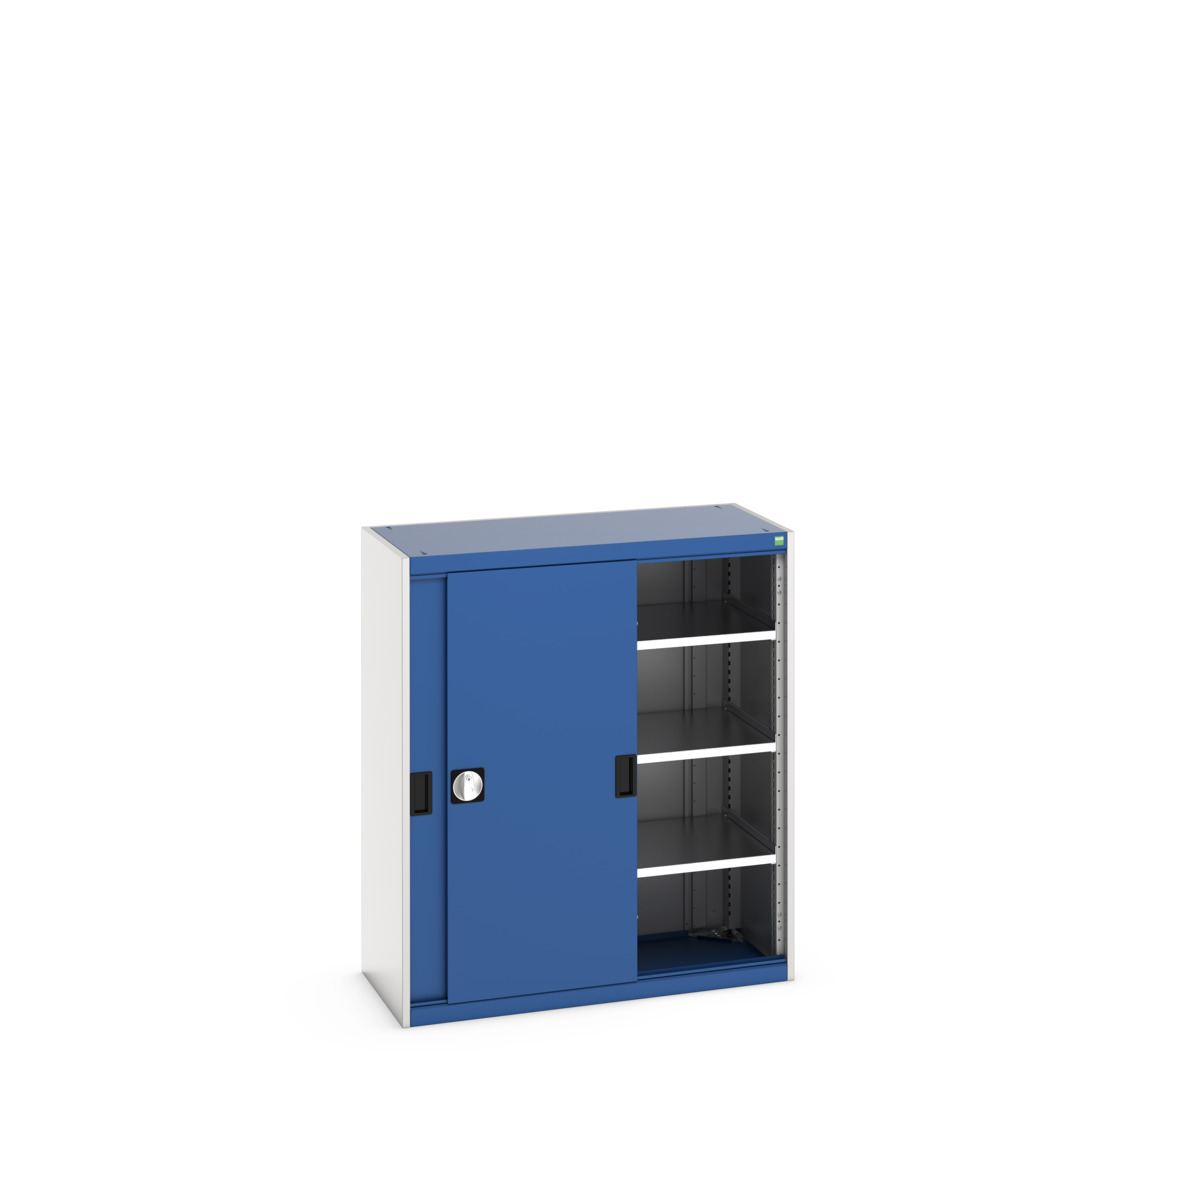 40013069.11V - Armoire Cubio SMS-10512-1.1